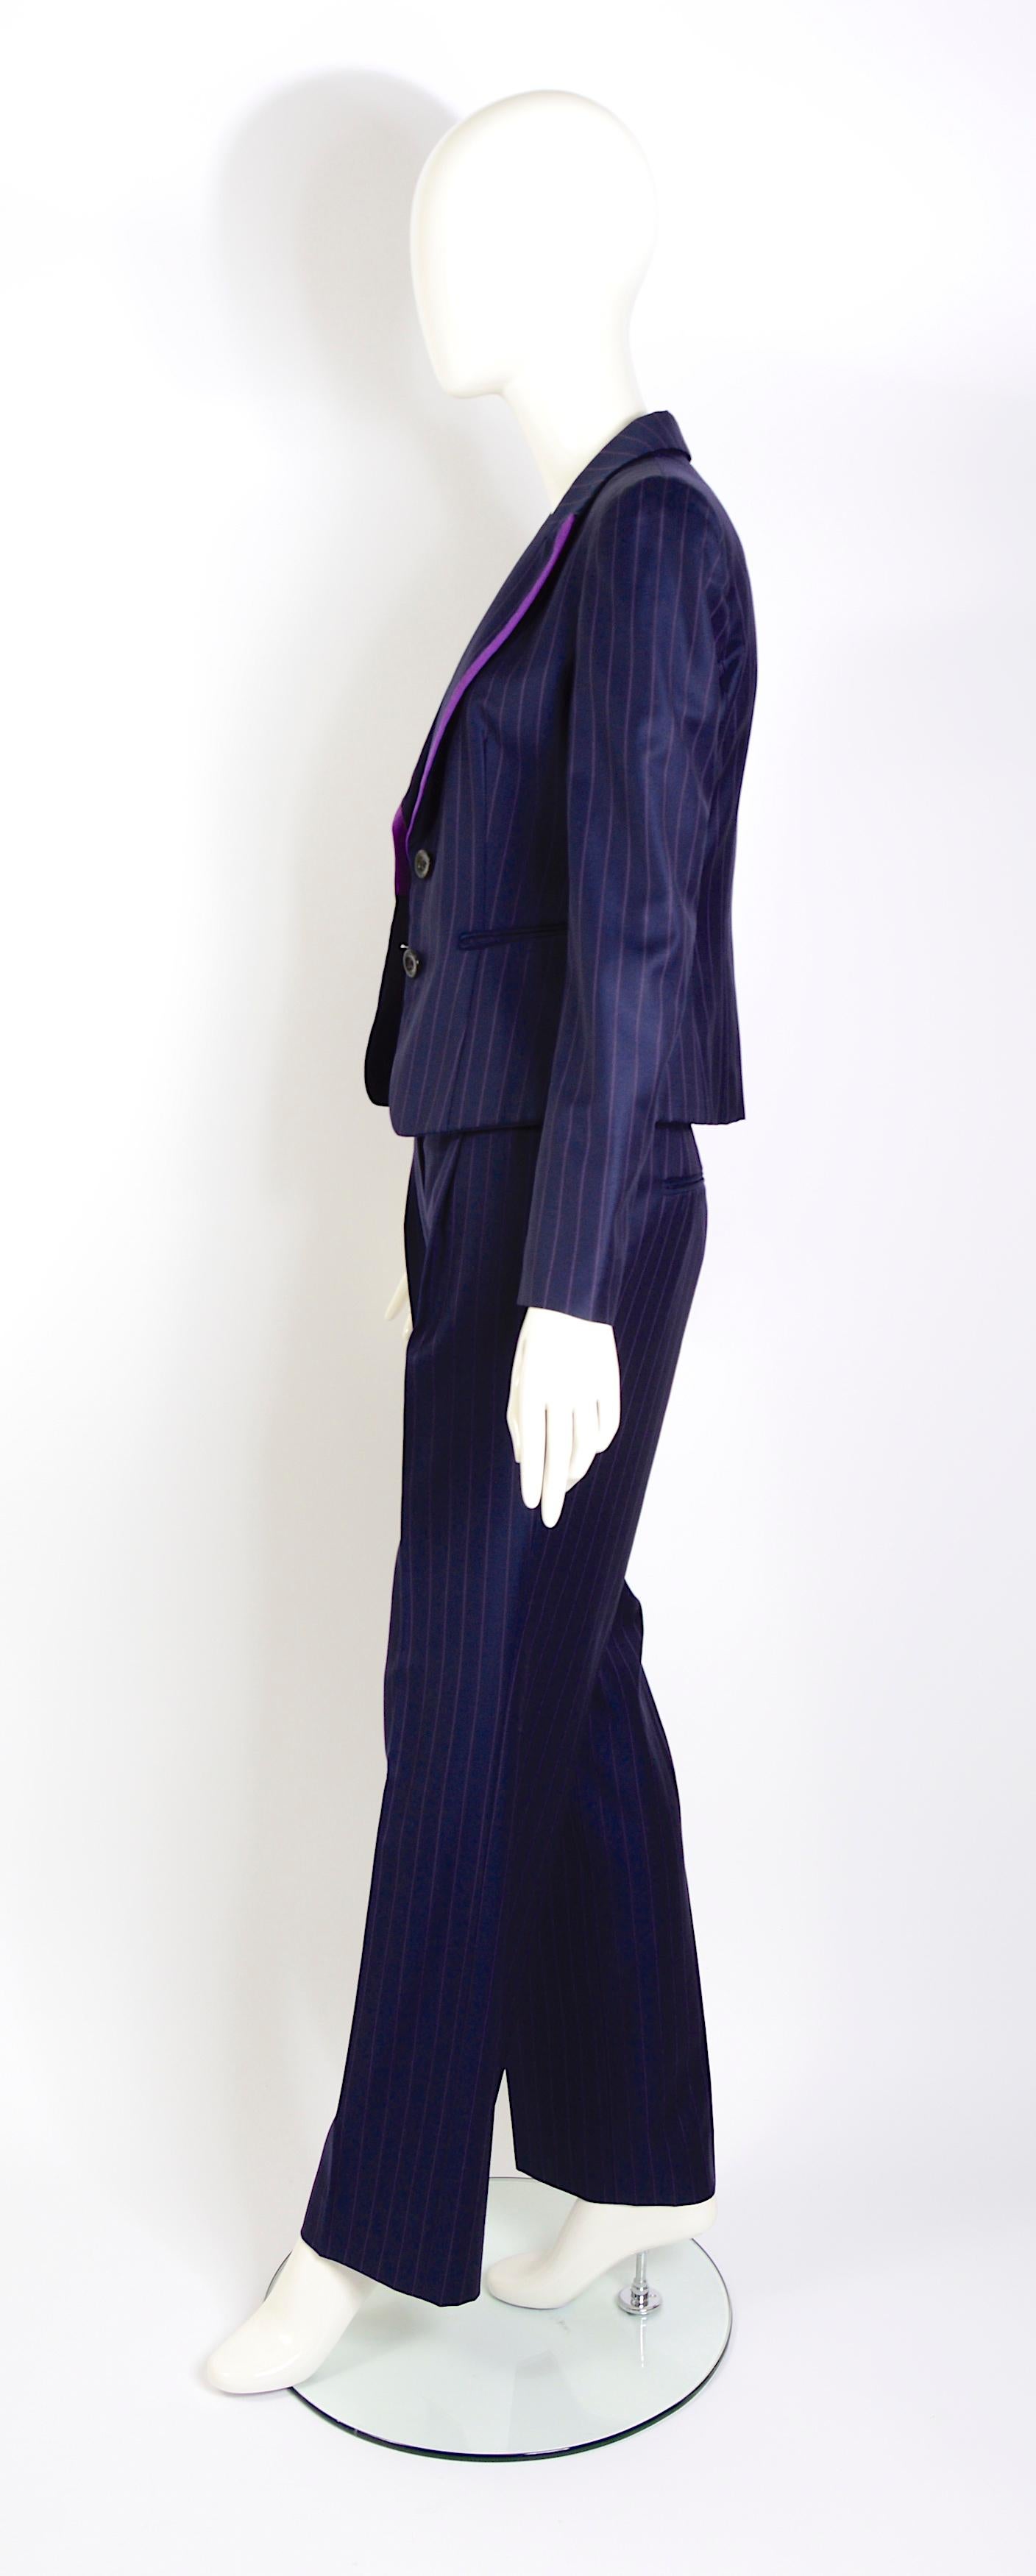 Christian Dior by John Galliano vintage S/S 2008 pin striped suit 1